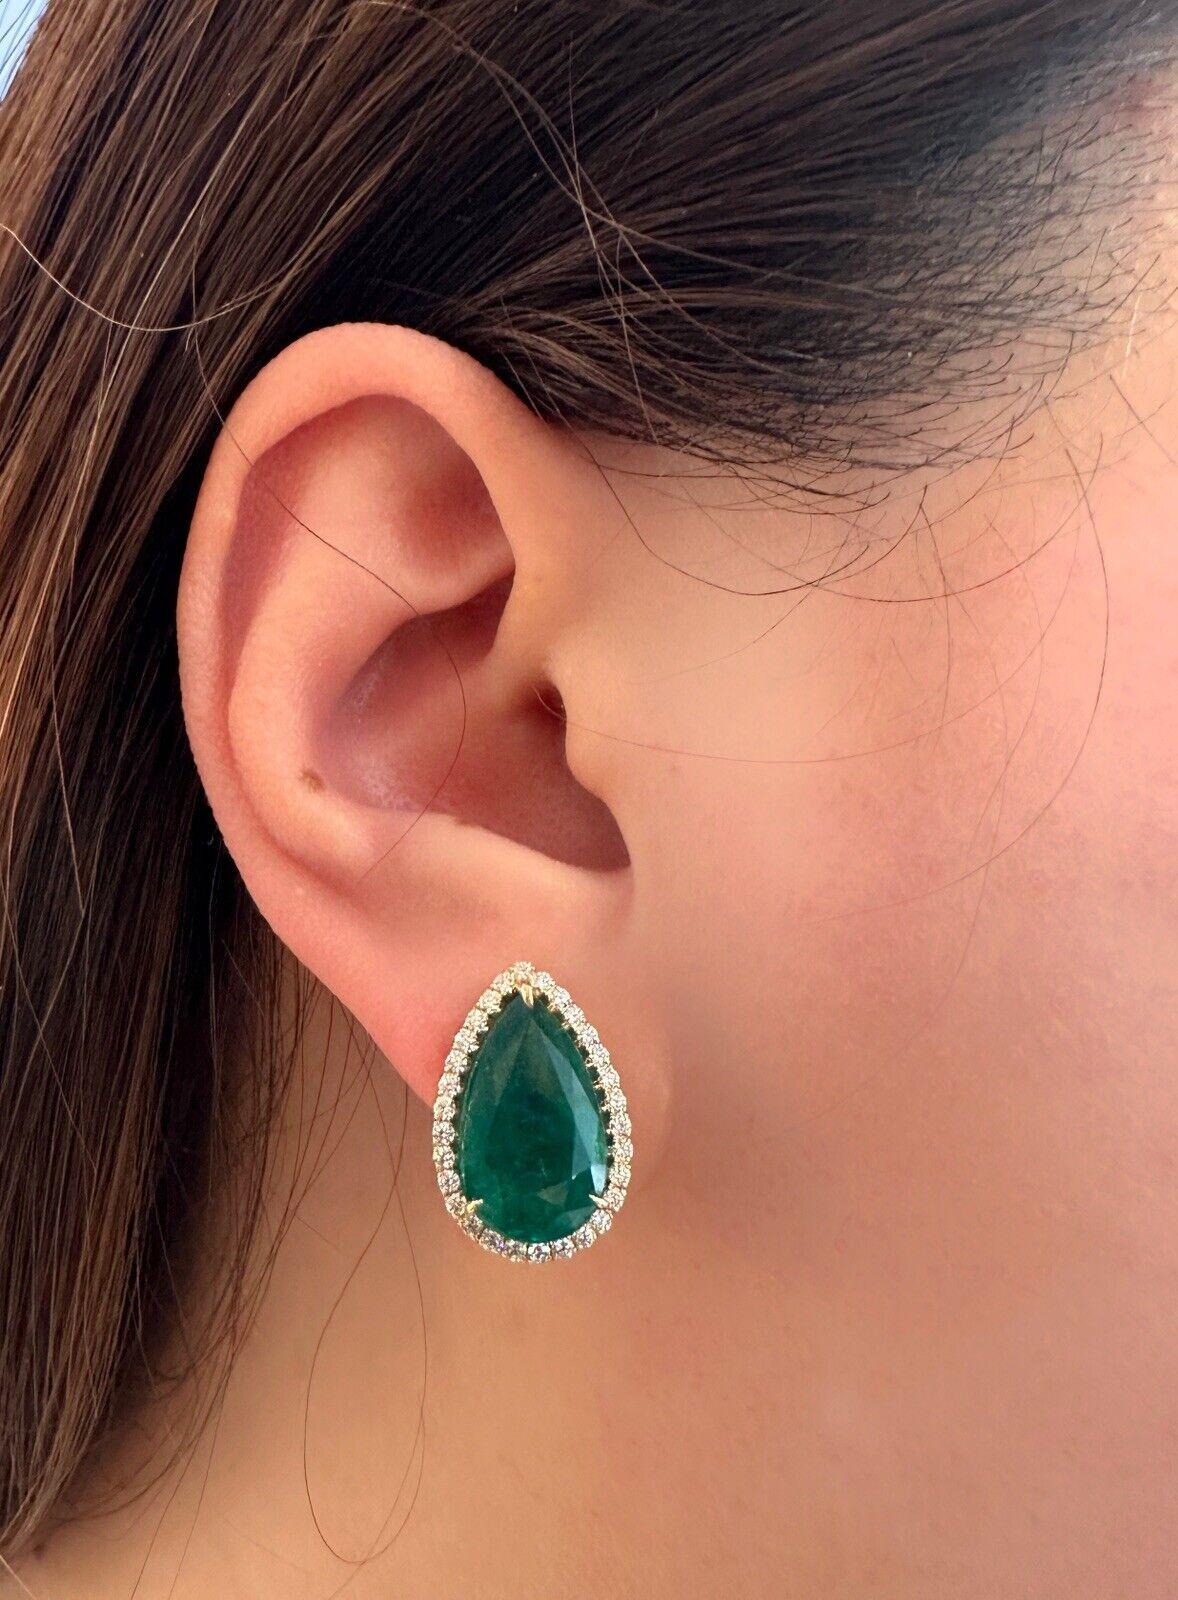 Introducing our captivating GIA Certified Pear Shaped Emerald Halo Diamond Earrings in 18k Yellow Gold. The Zambian Emeralds are elegantly encircled by a halo of Round Brilliant Diamonds.

Features:

Two Natural Pear Shaped Emeralds, total weight